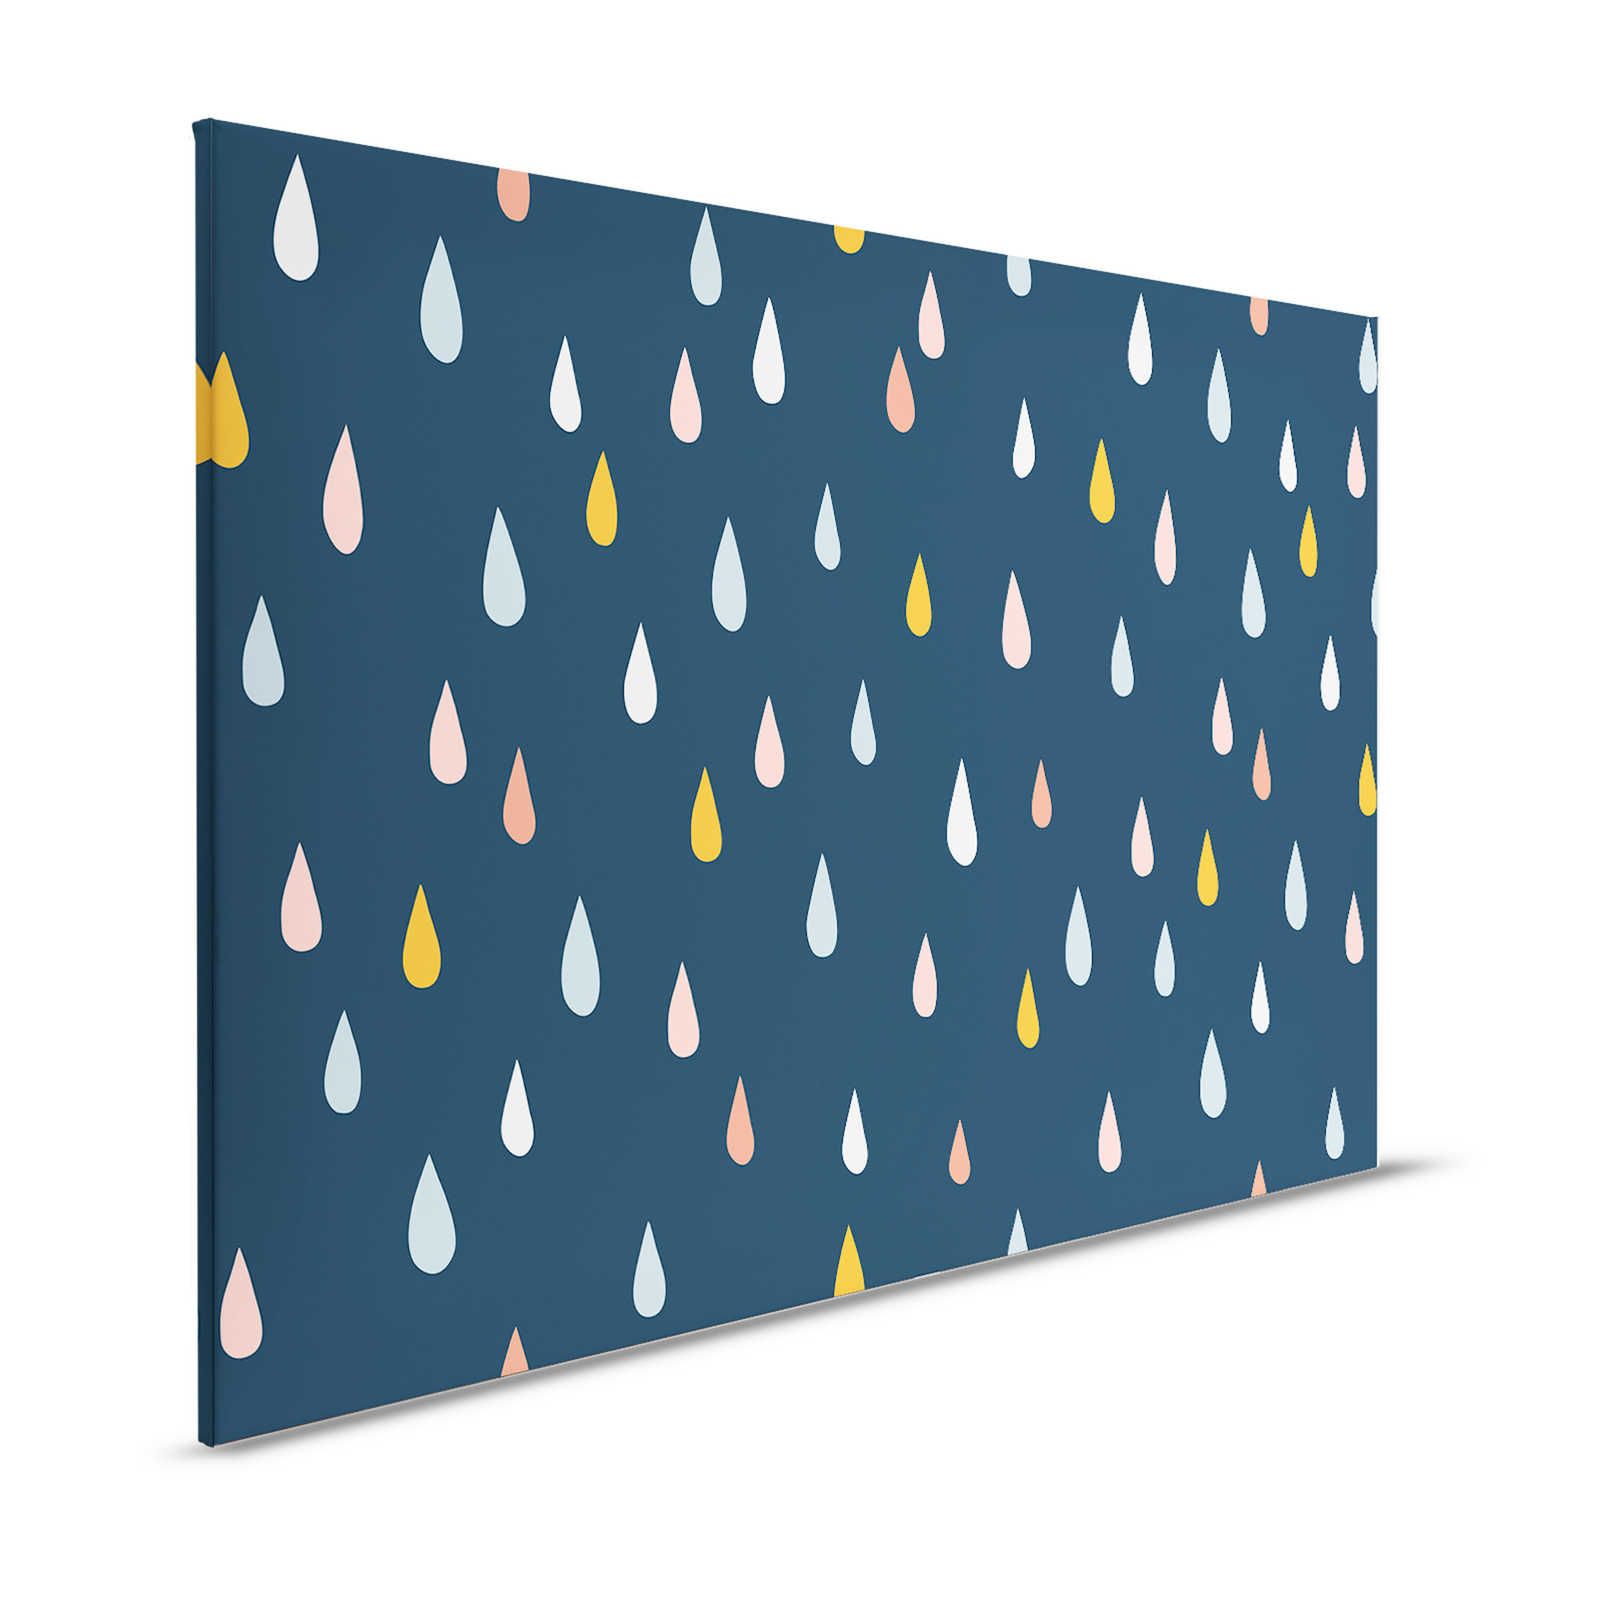 Canvas for children's room with colourful drops - 120 cm x 80 cm
